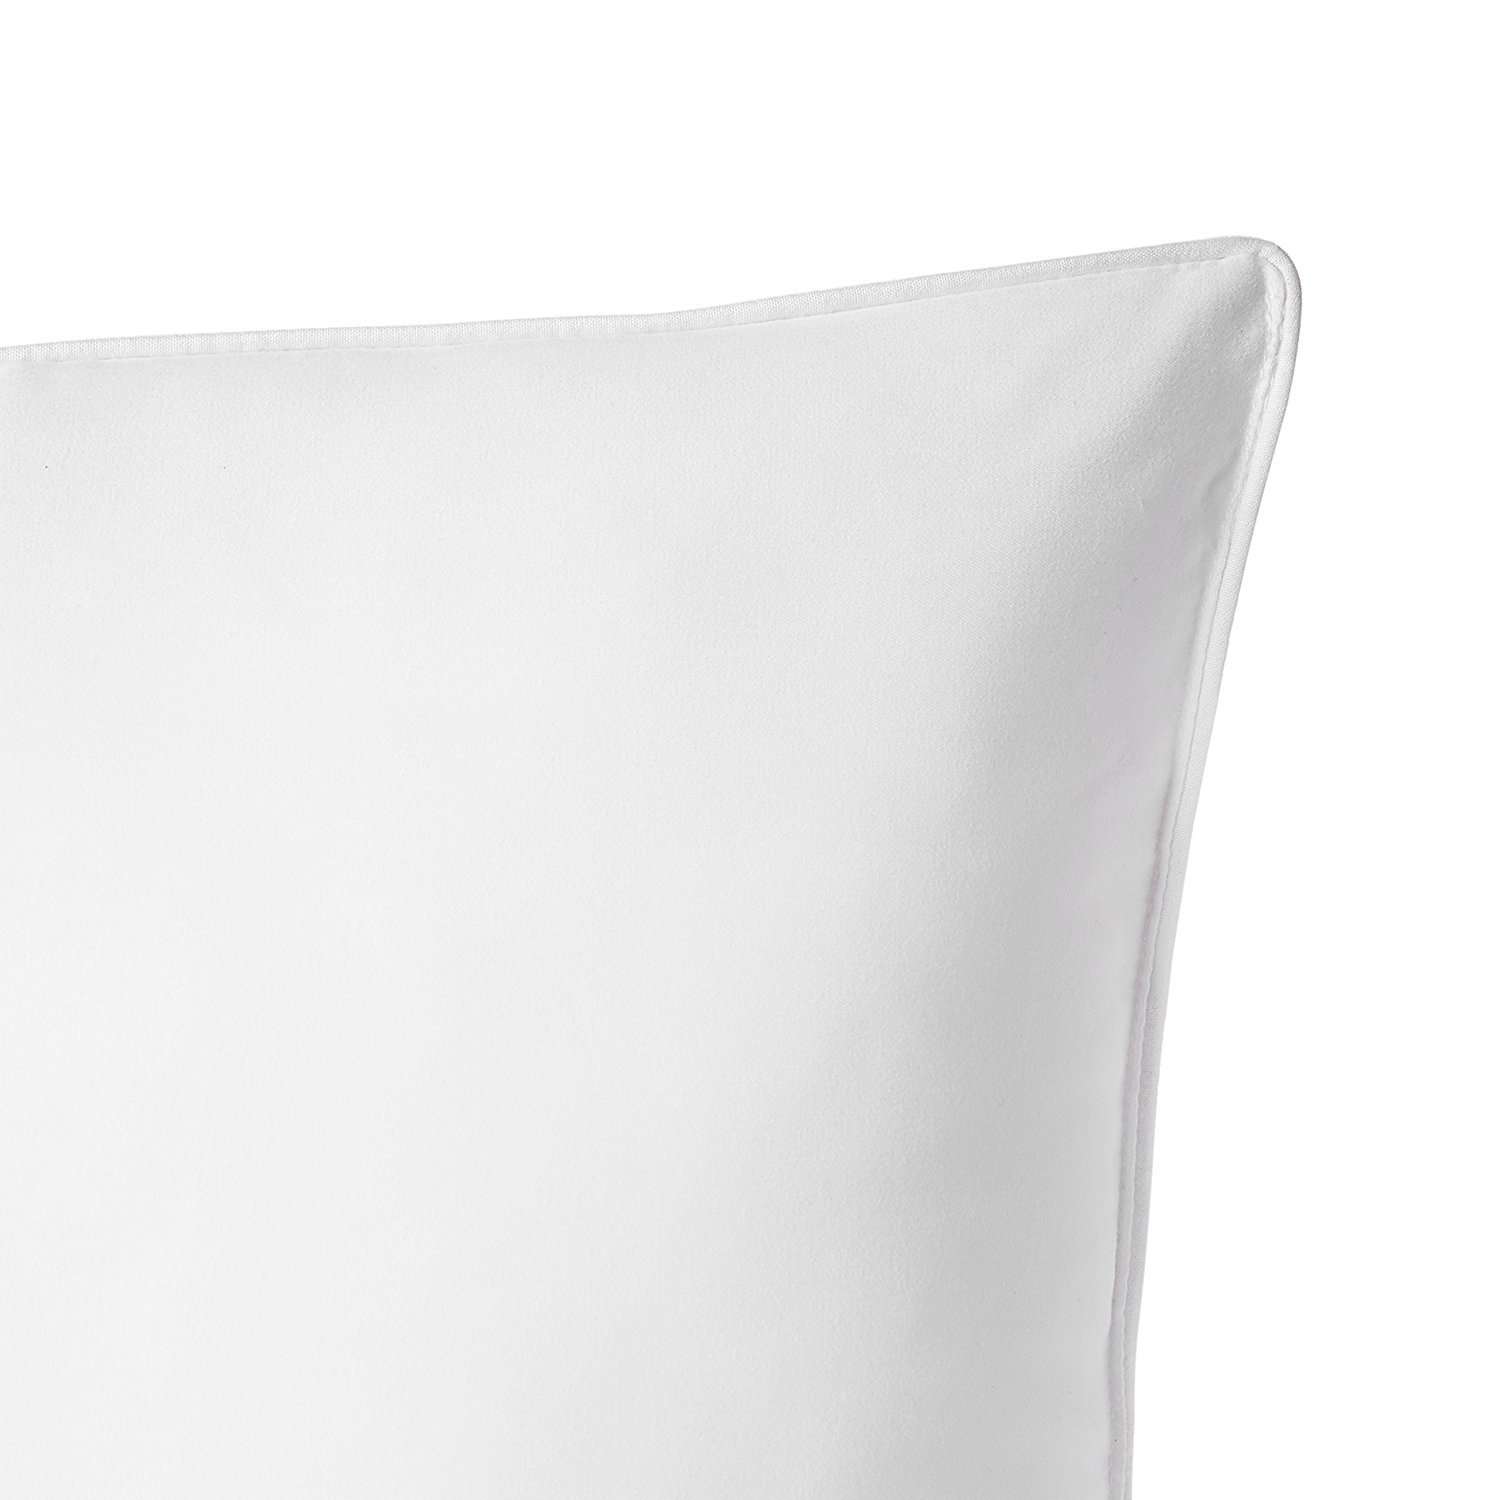 SWHF Premium Siliconised Super Soft Baby Pillow: 35X50 Cm - SWHF